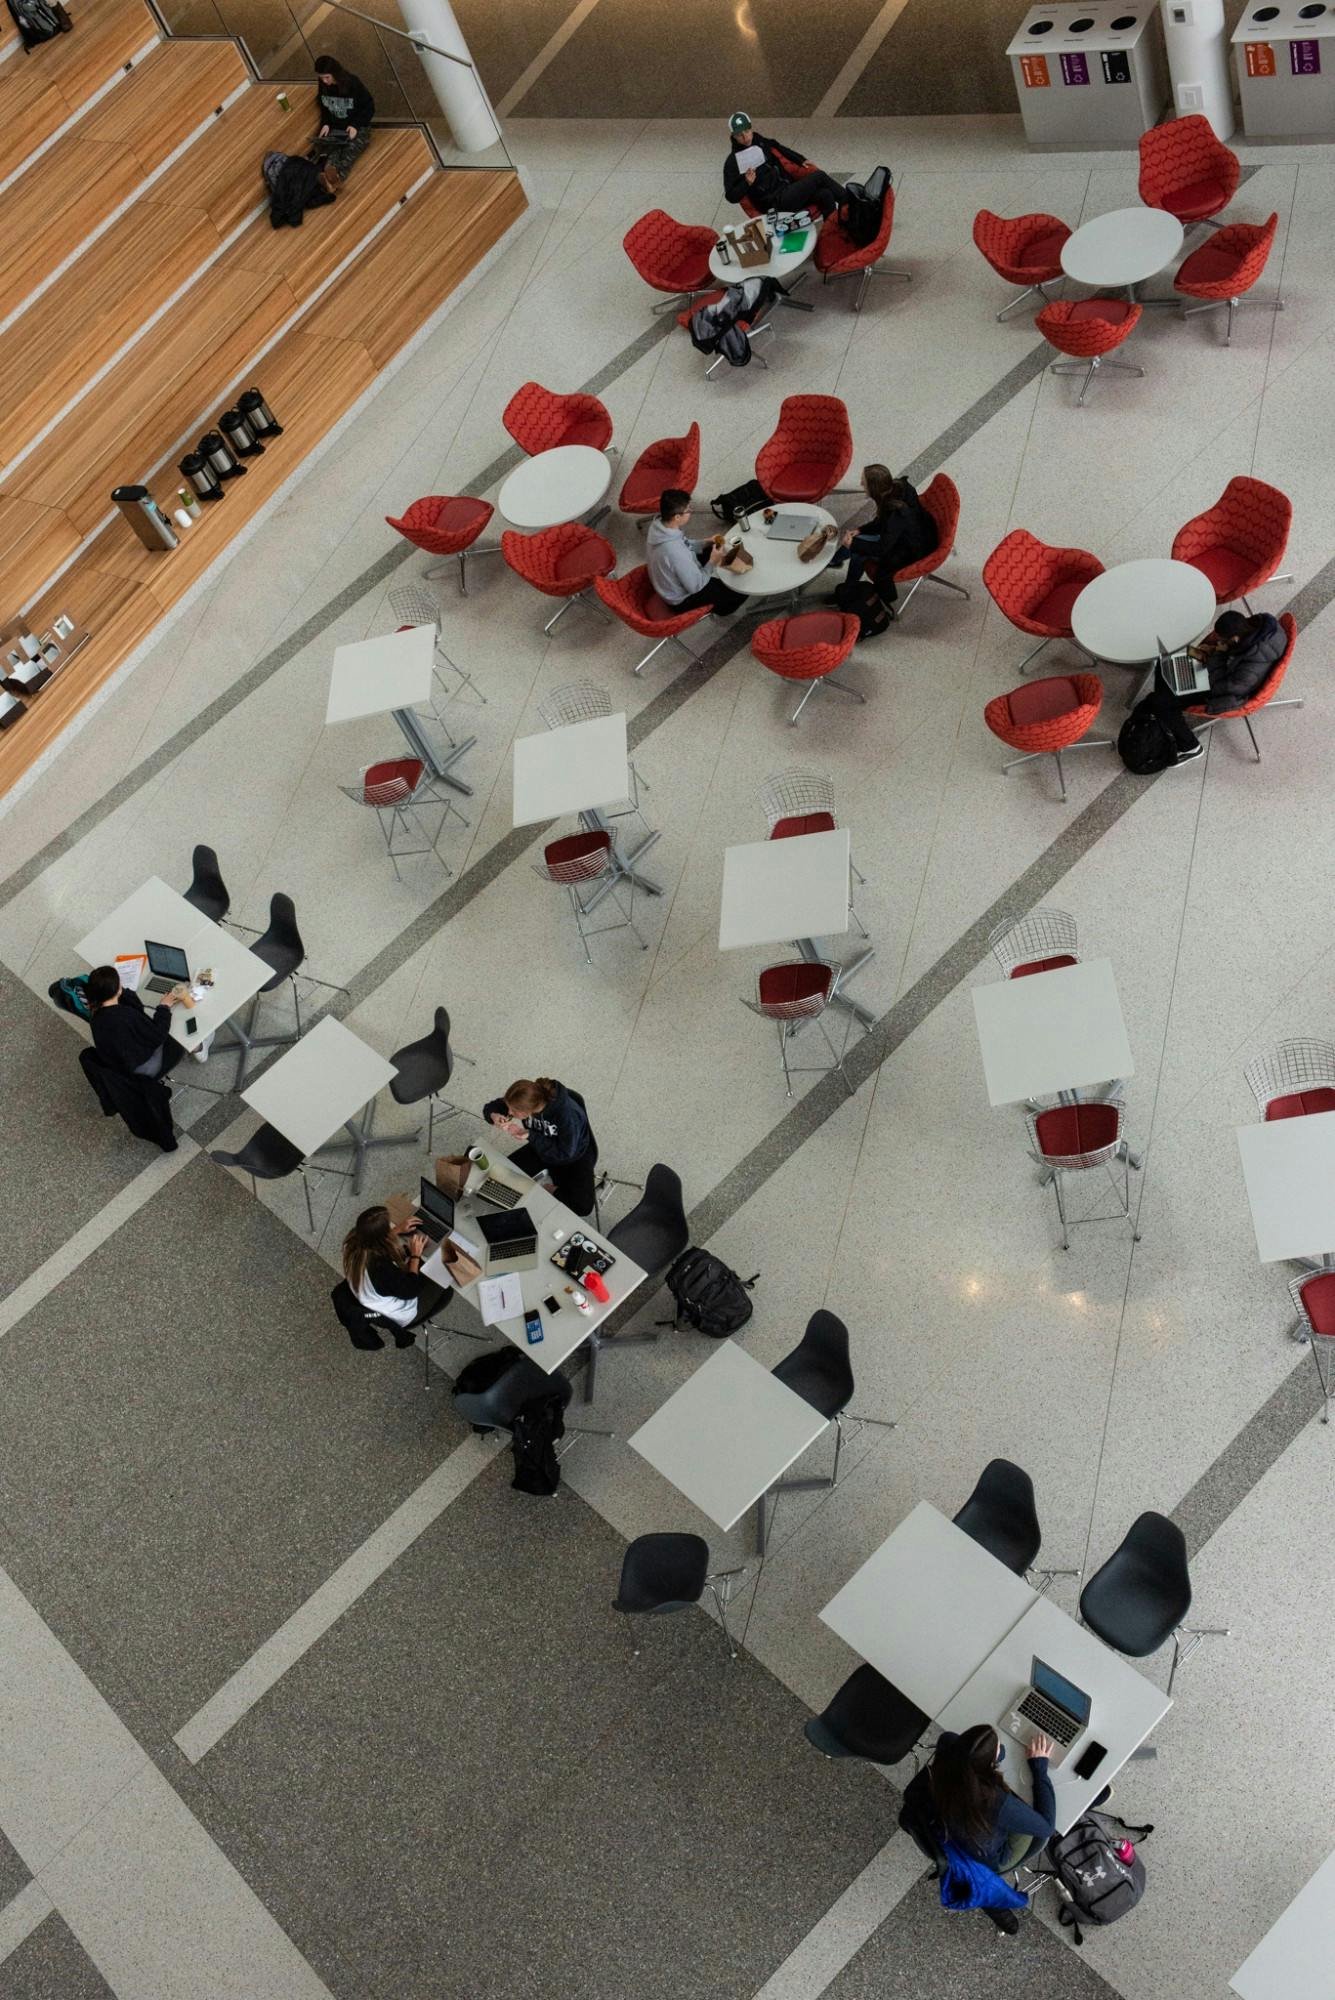 <p>Students continue to study in the Eppley Center after MSU released an email notifying students that administration canceled classes after noon on March 11, 2020.</p>